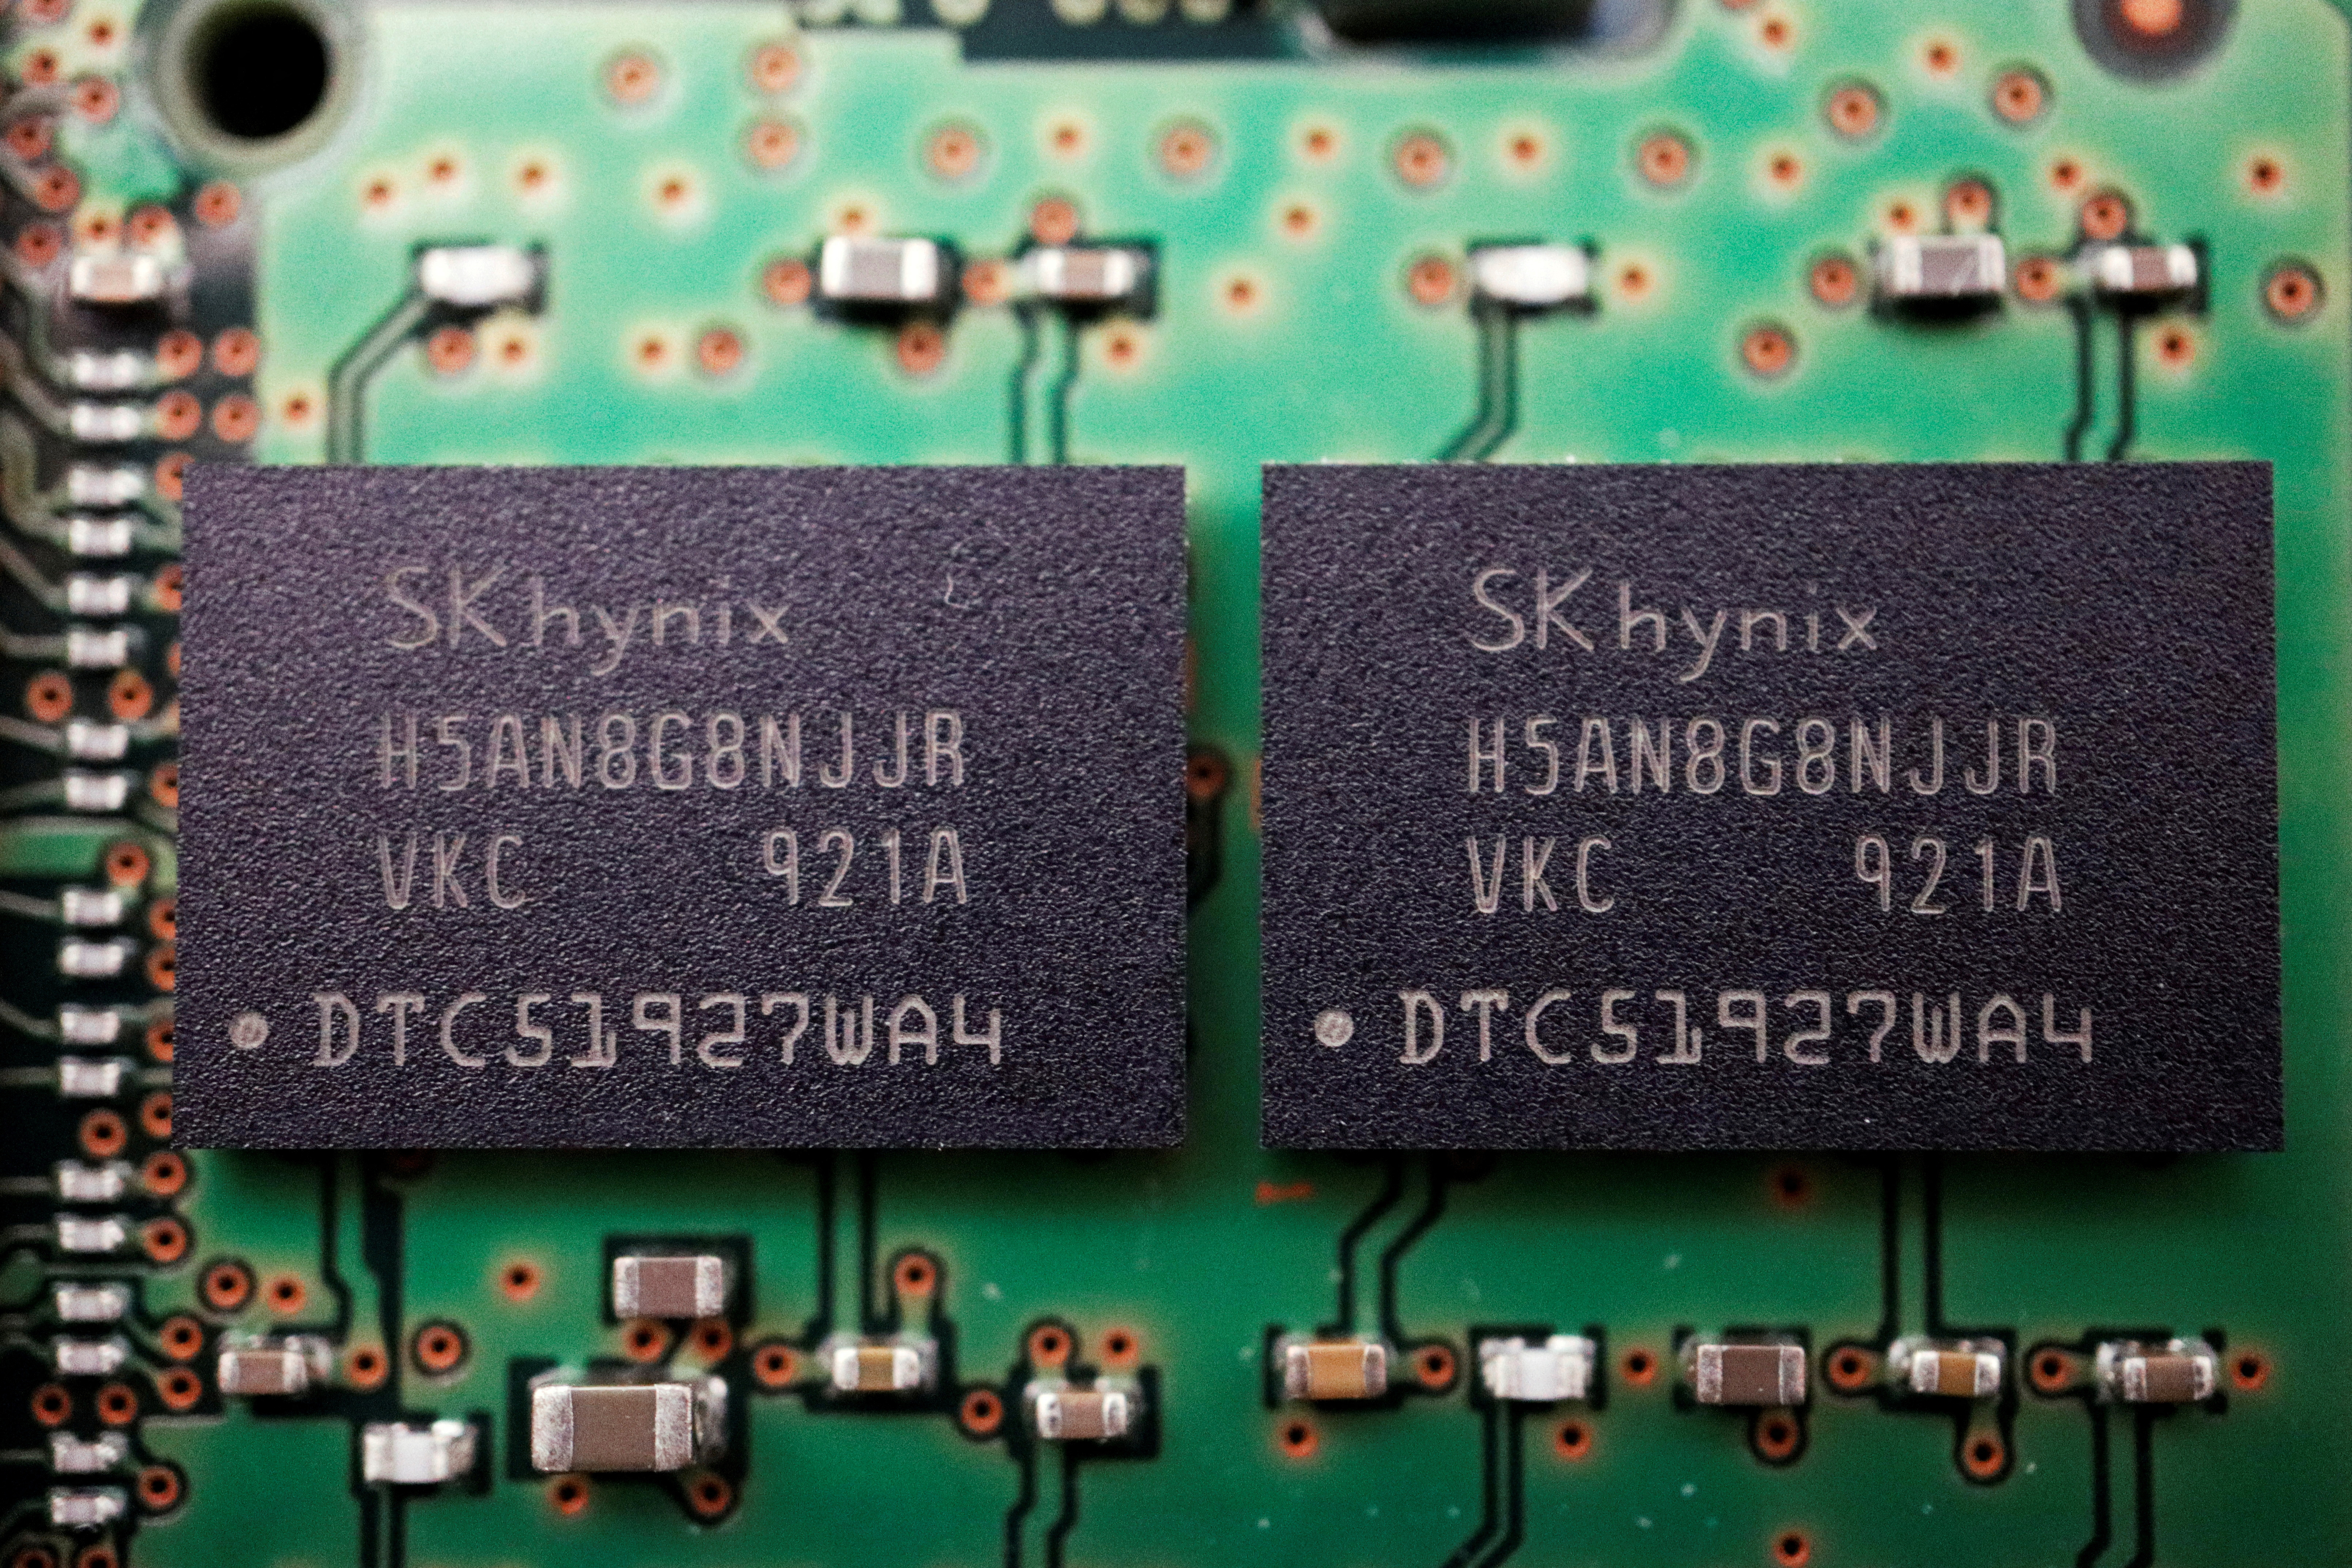 Illustrative image of memory chips by SK Hynix